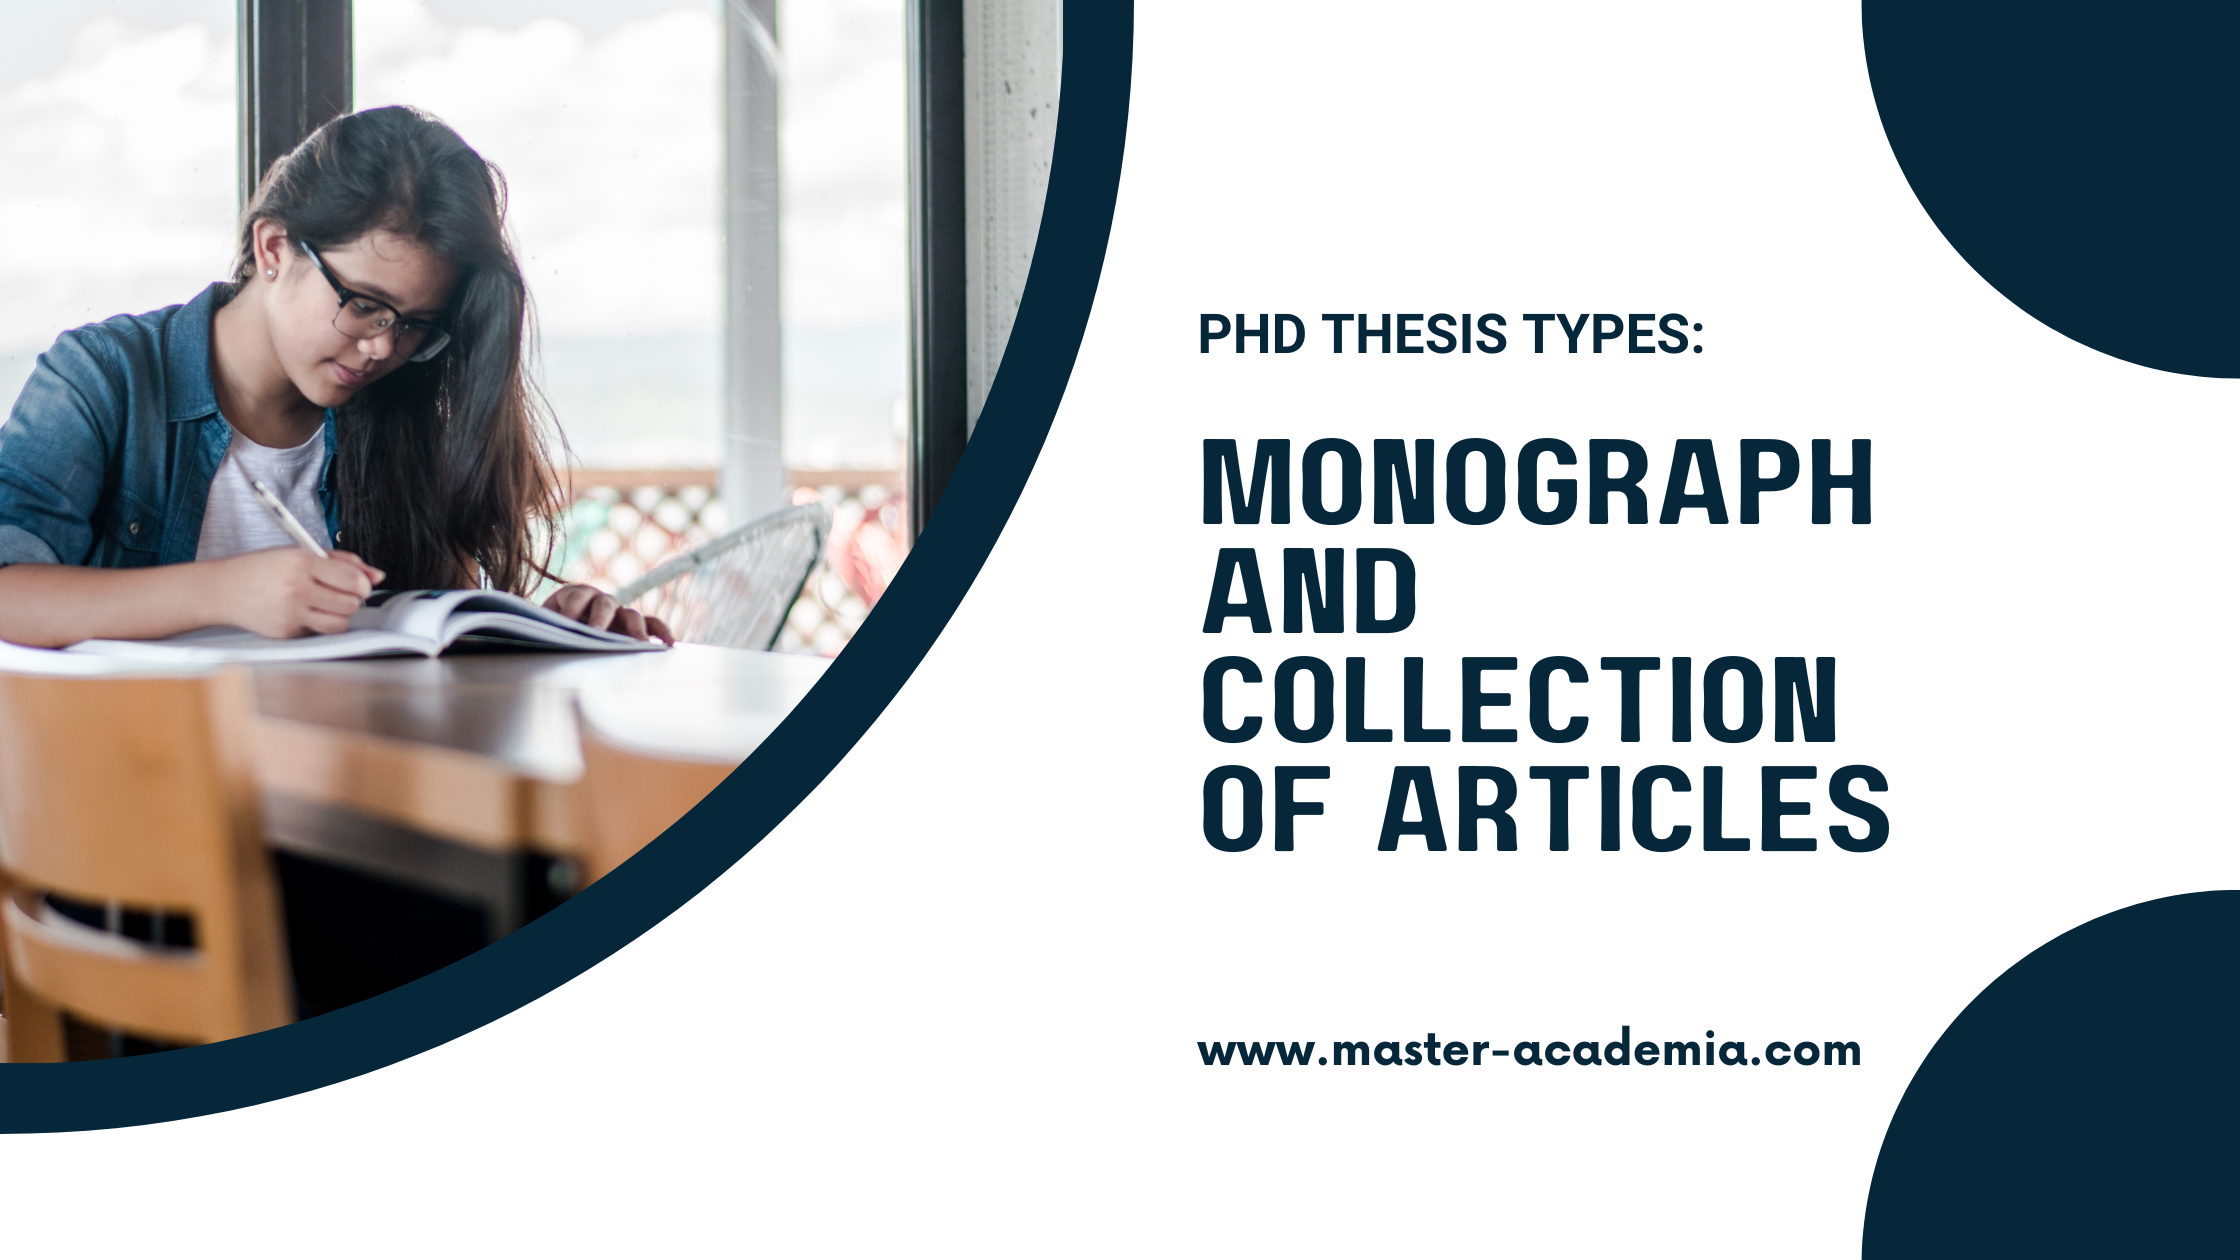 dissertation and monograph difference